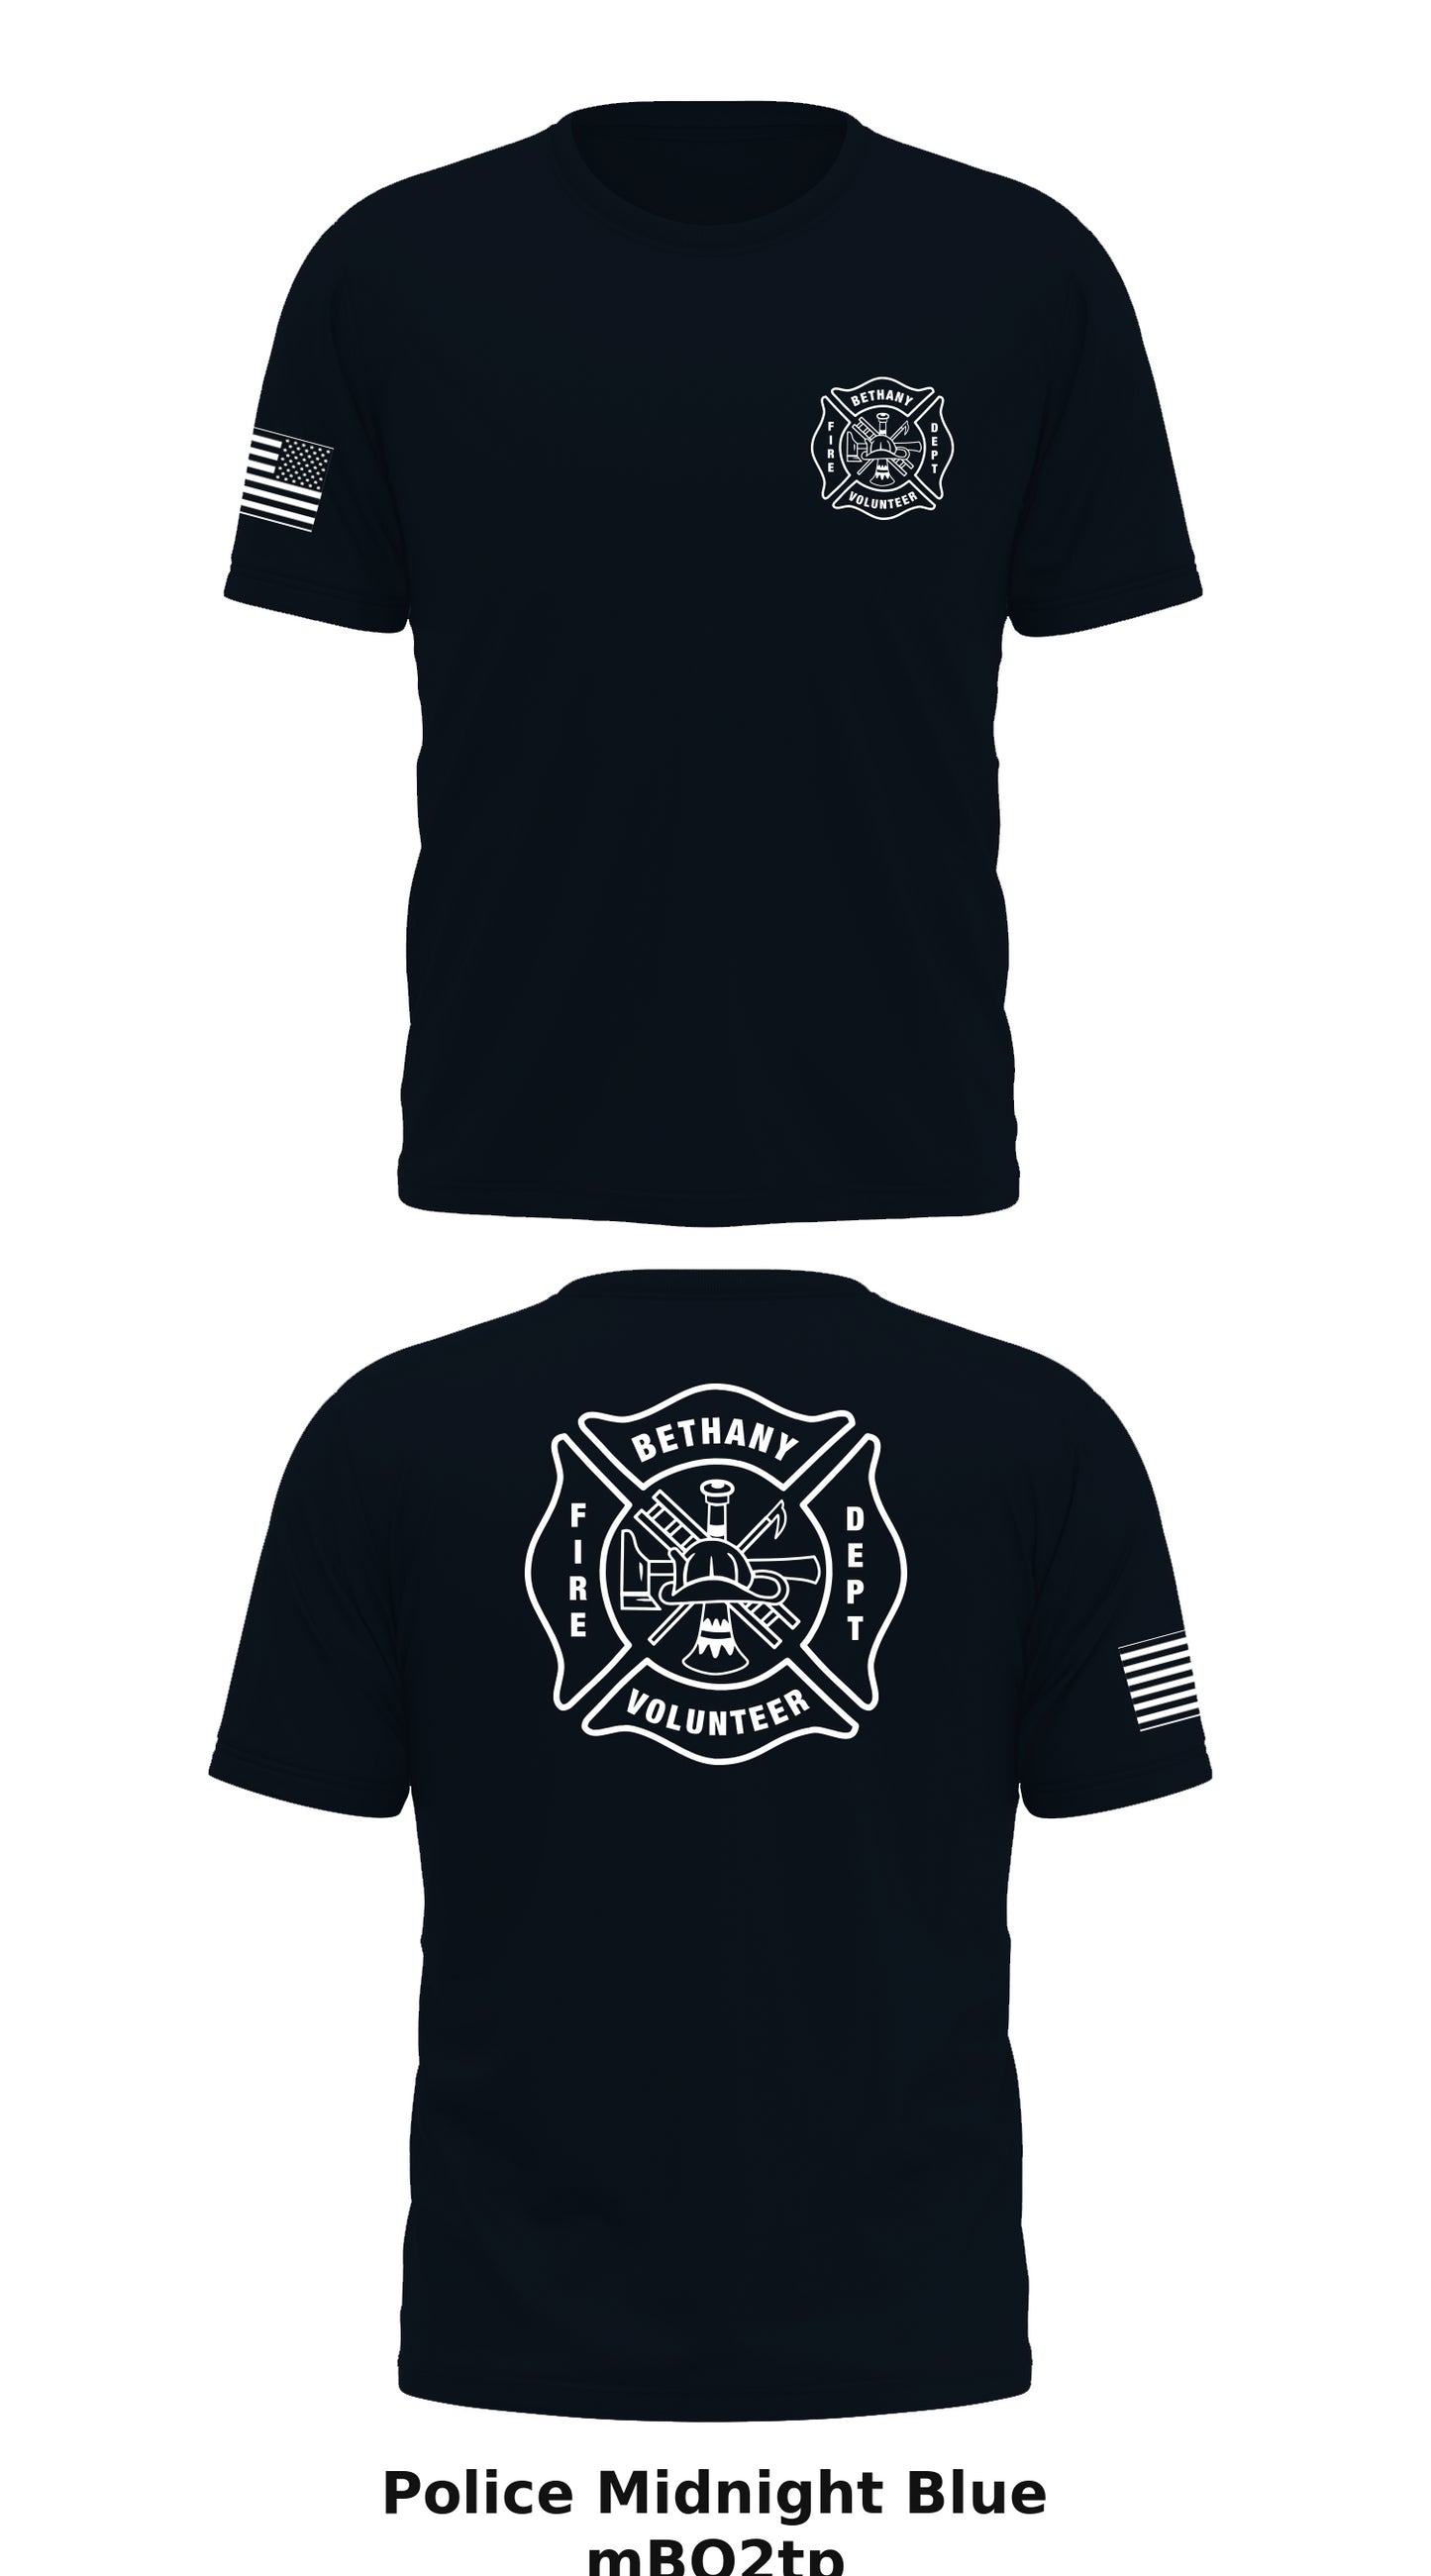 Bethany Fire Department Store 1 Core Men's SS Performance Tee - mBQ2tp